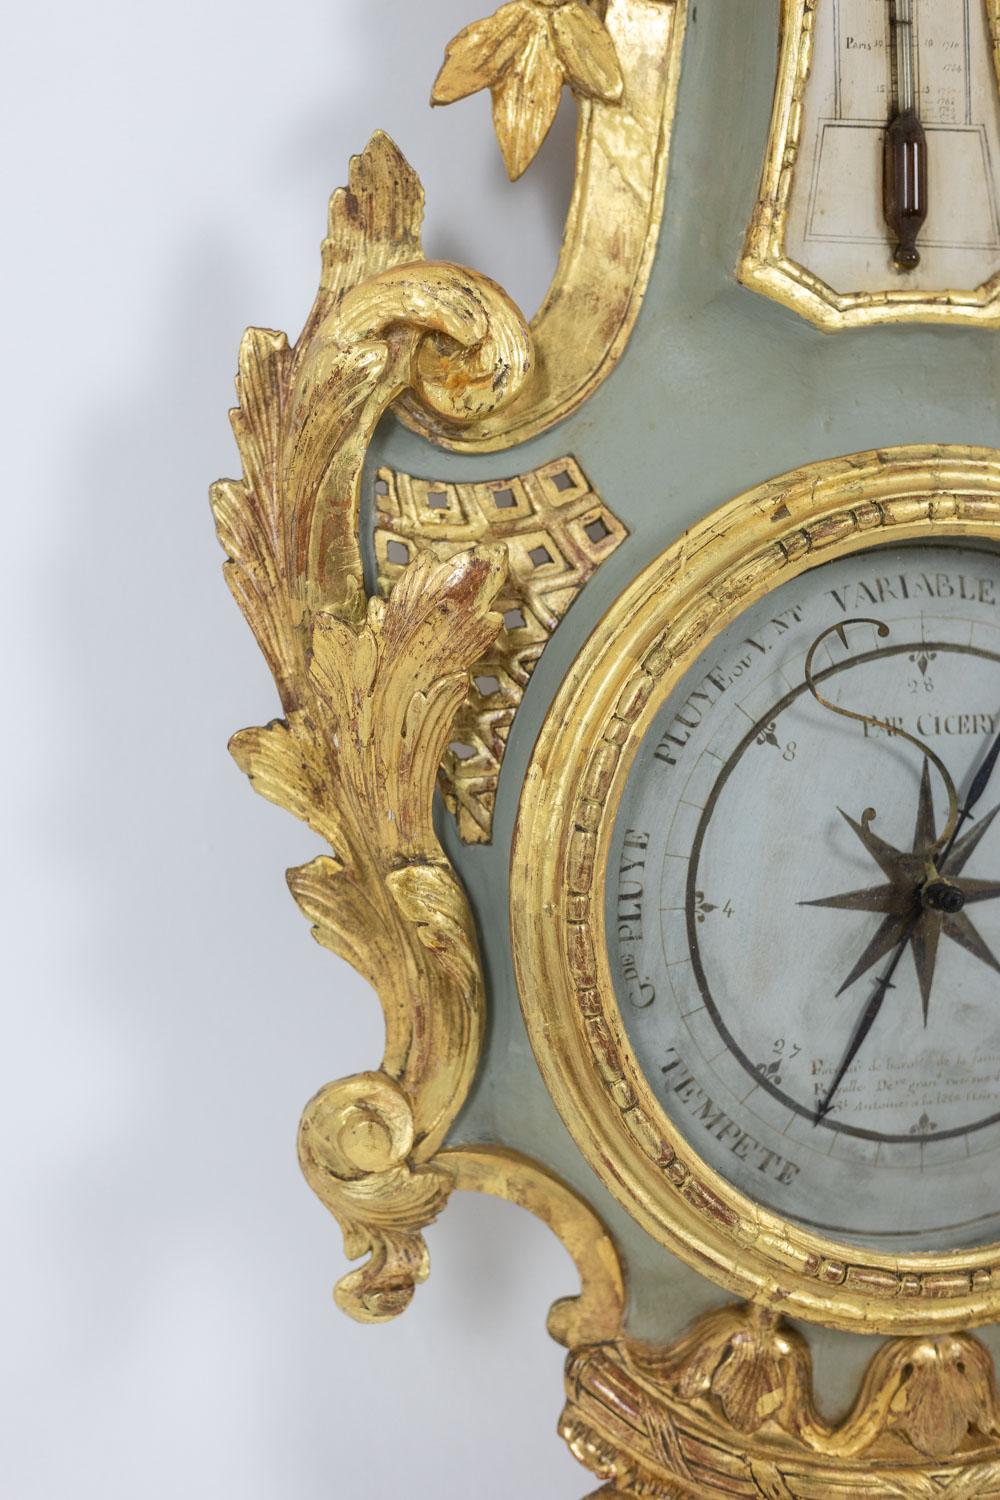 French Cicery. Barometer in carved and gilded wood. 18th century period.